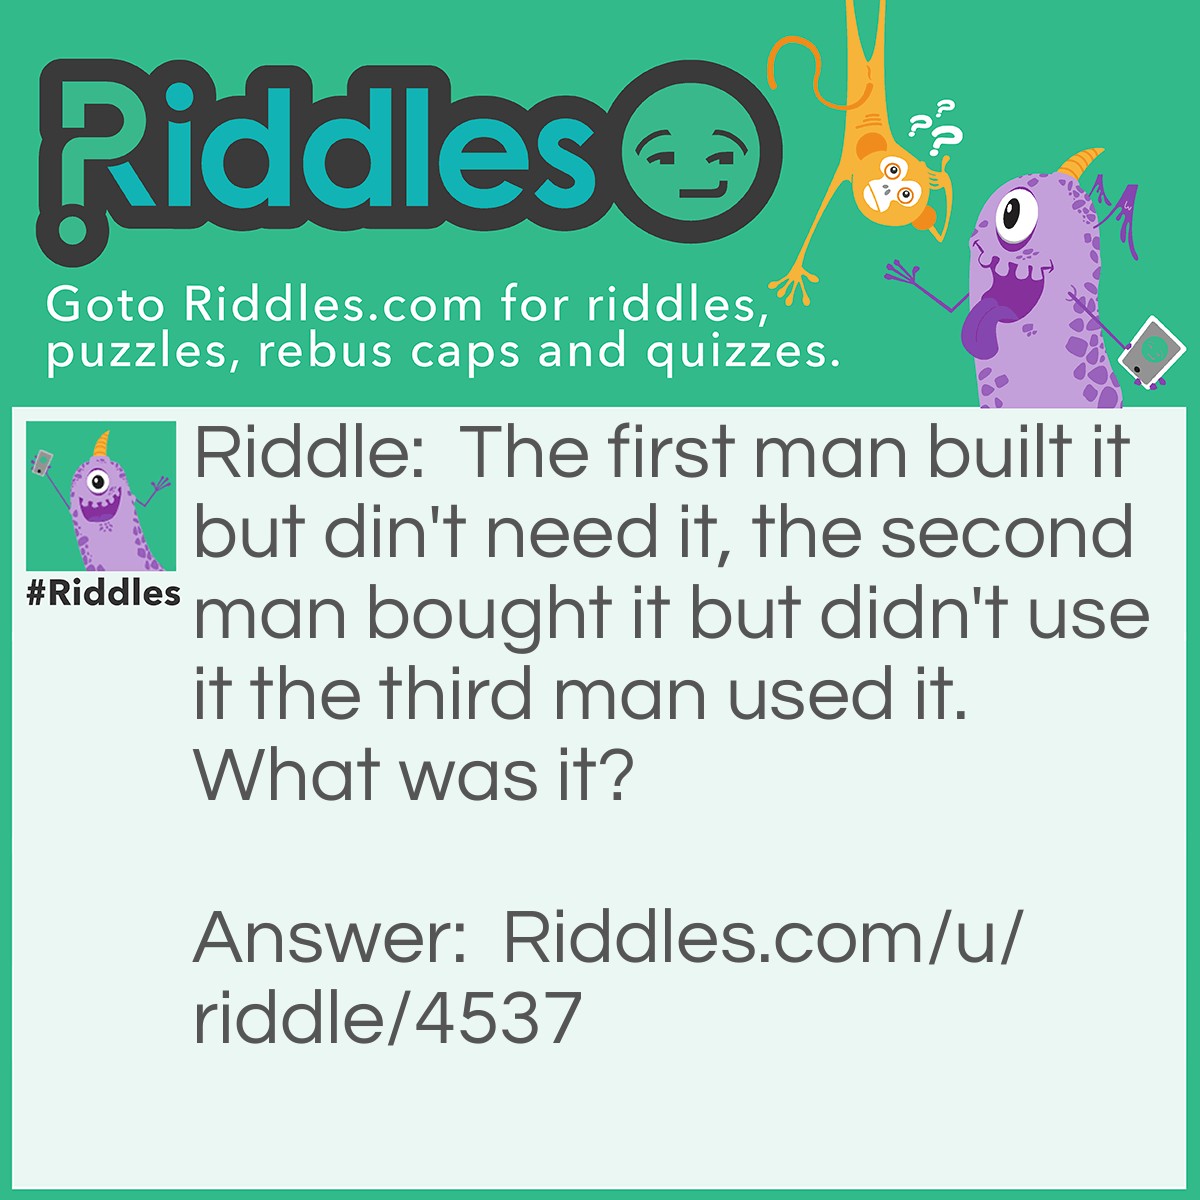 Riddle: The first man built it but din't need it, the second man bought it but didn't use it the third man used it. What was it? Answer: A coffin.